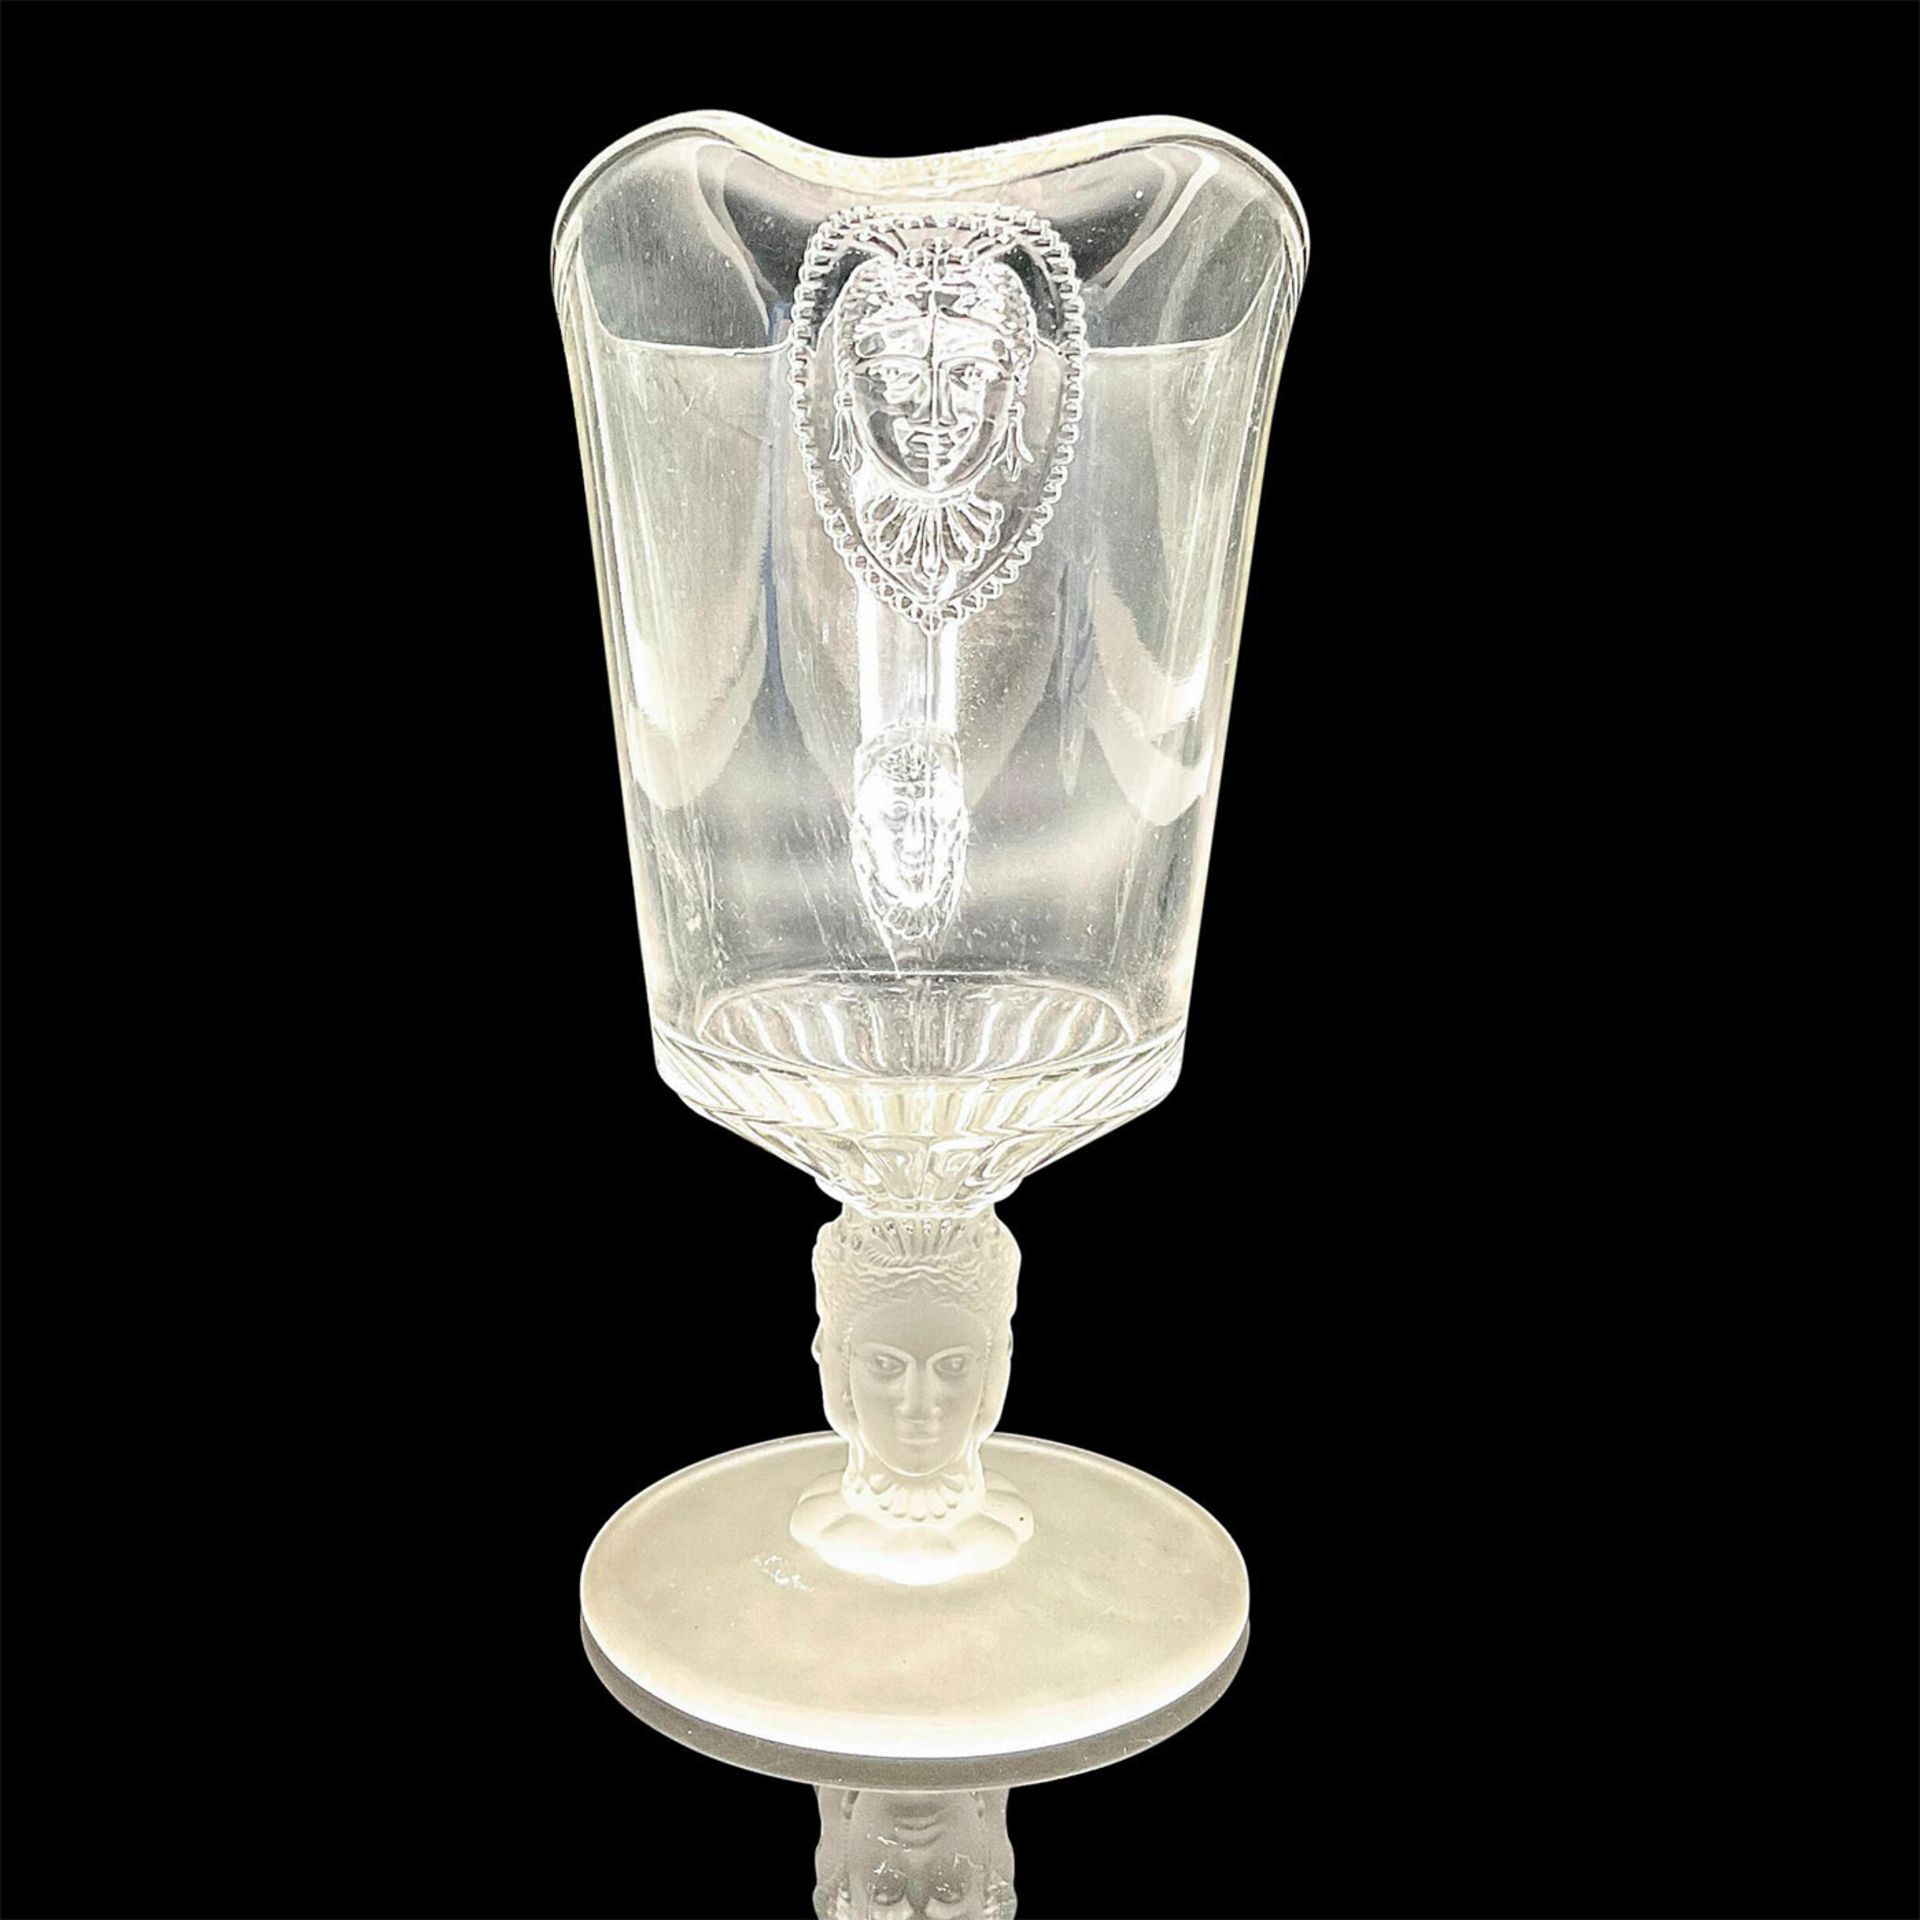 George Duncan Glass Three Face Creamer - Image 2 of 3